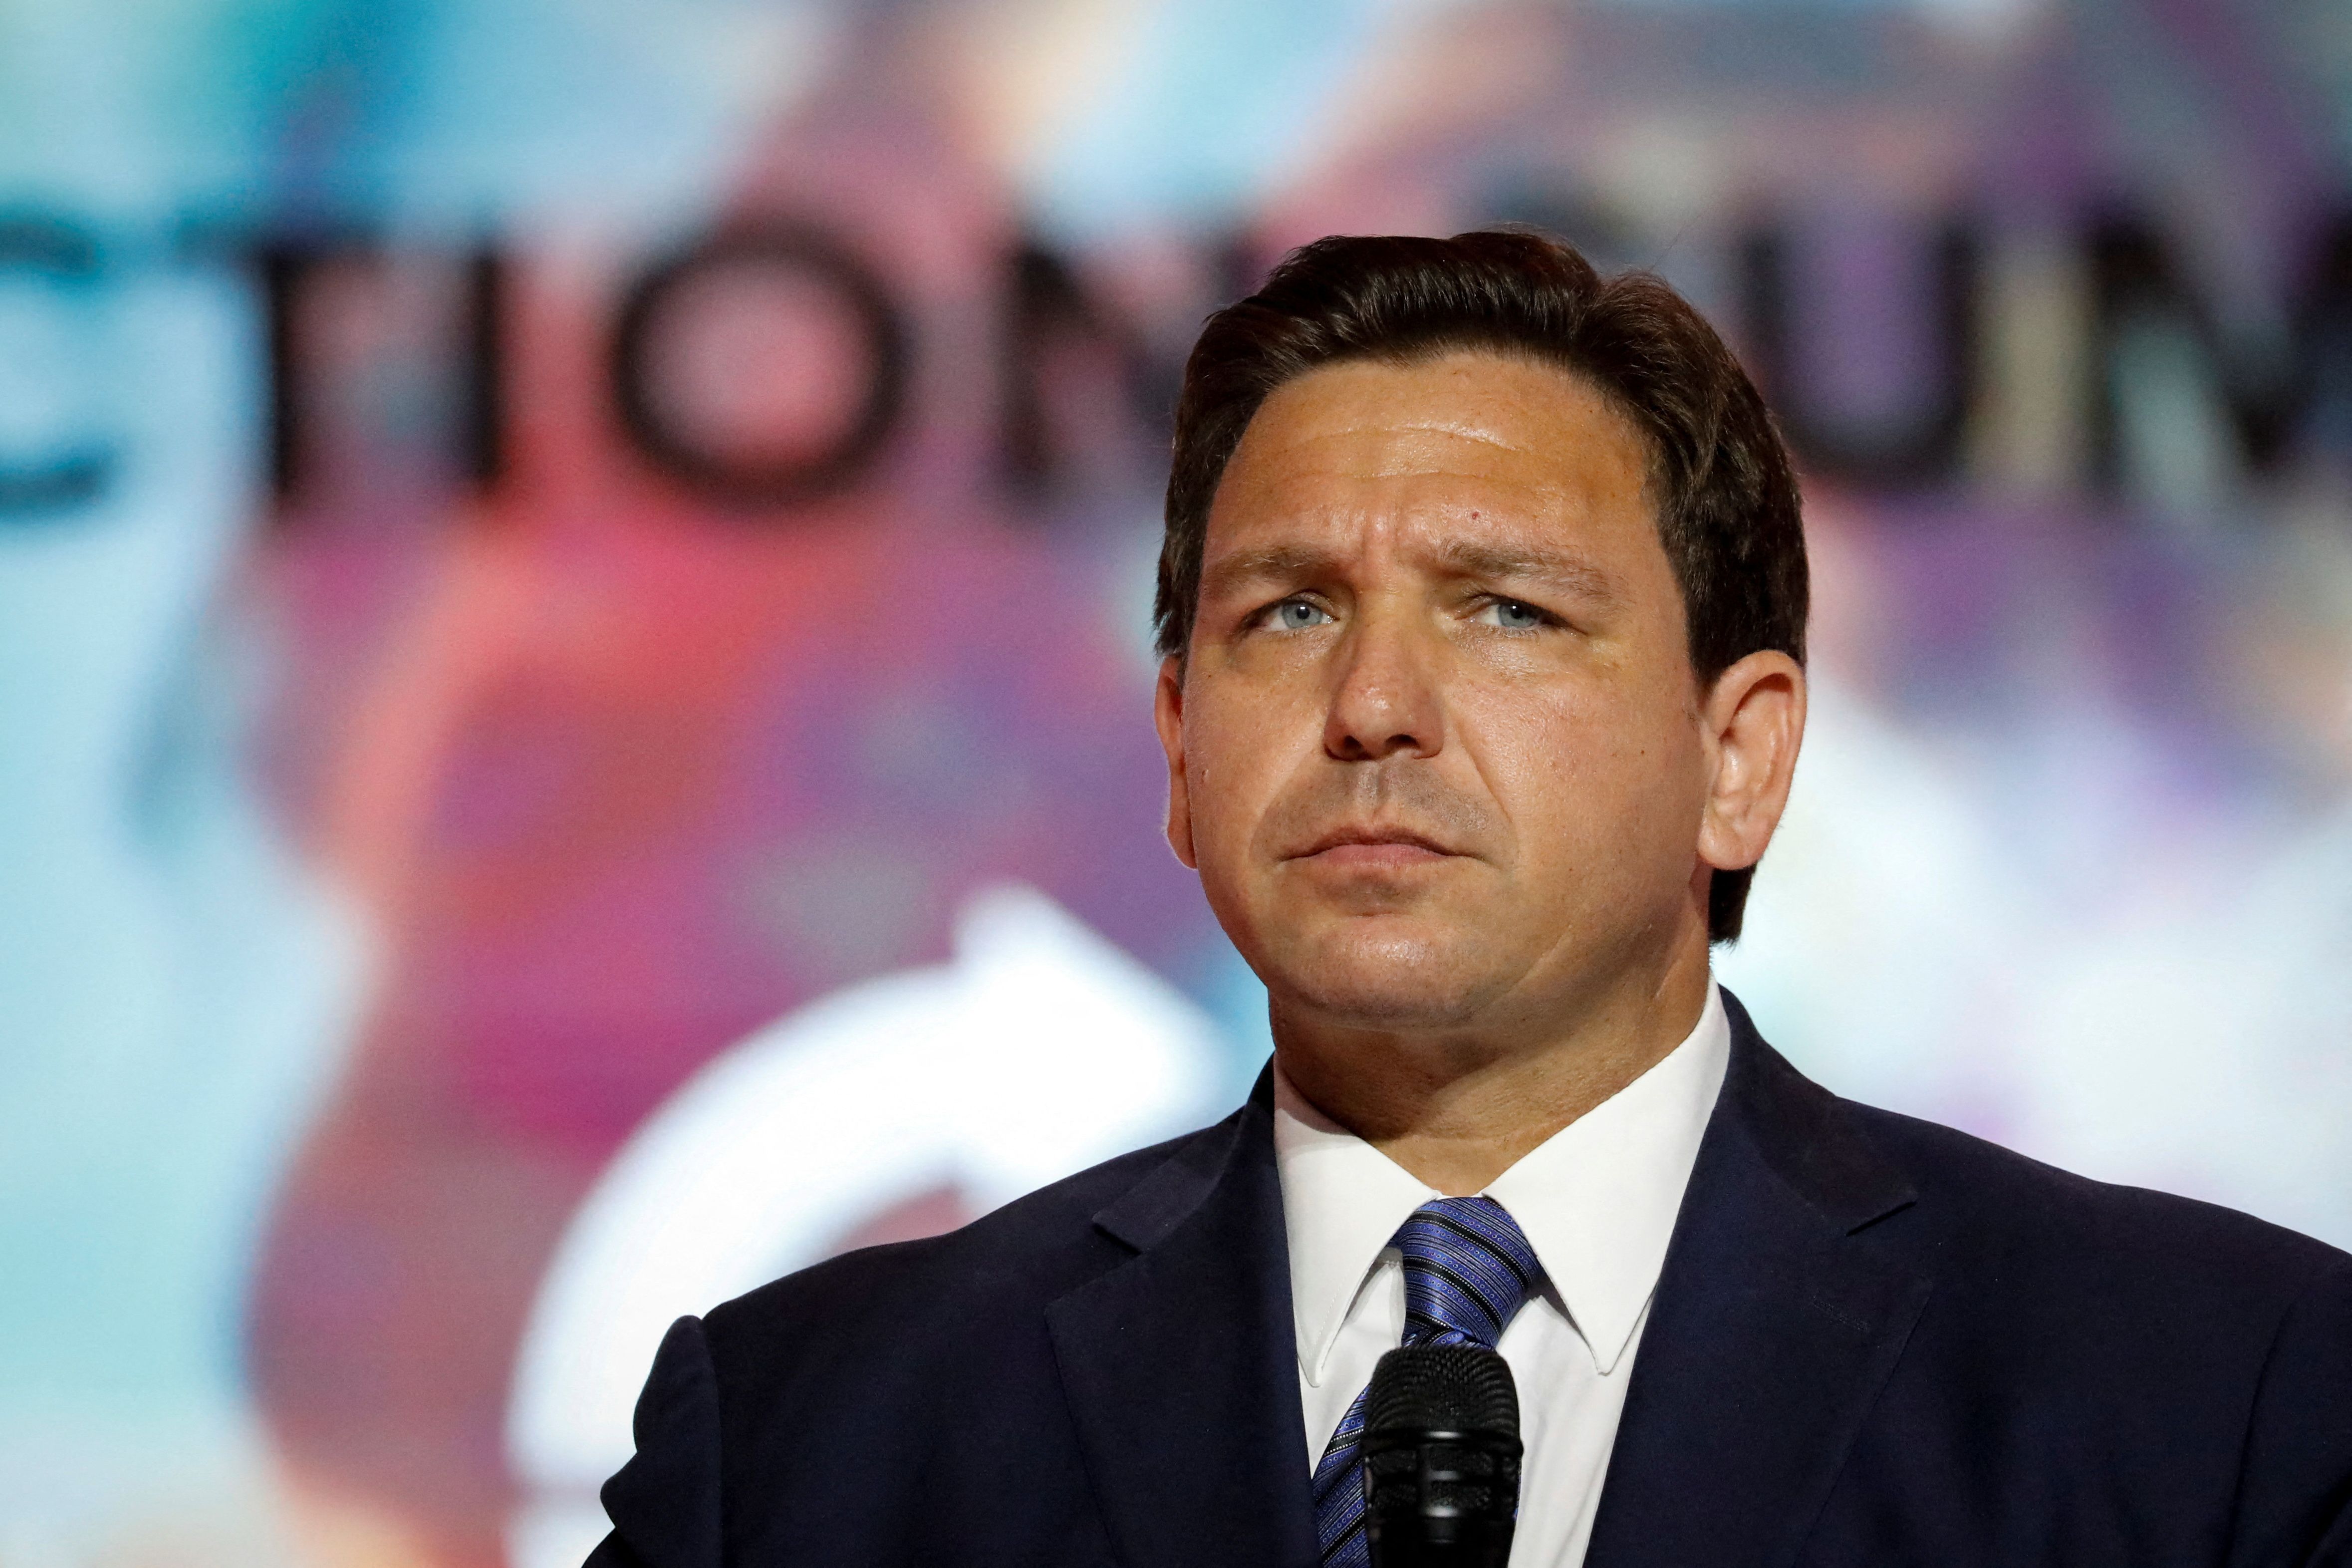 Ron DeSantis, unconstrained by constitutional checks, is flexing his power  in Florida ahead of 2024 decision | CNN Politics